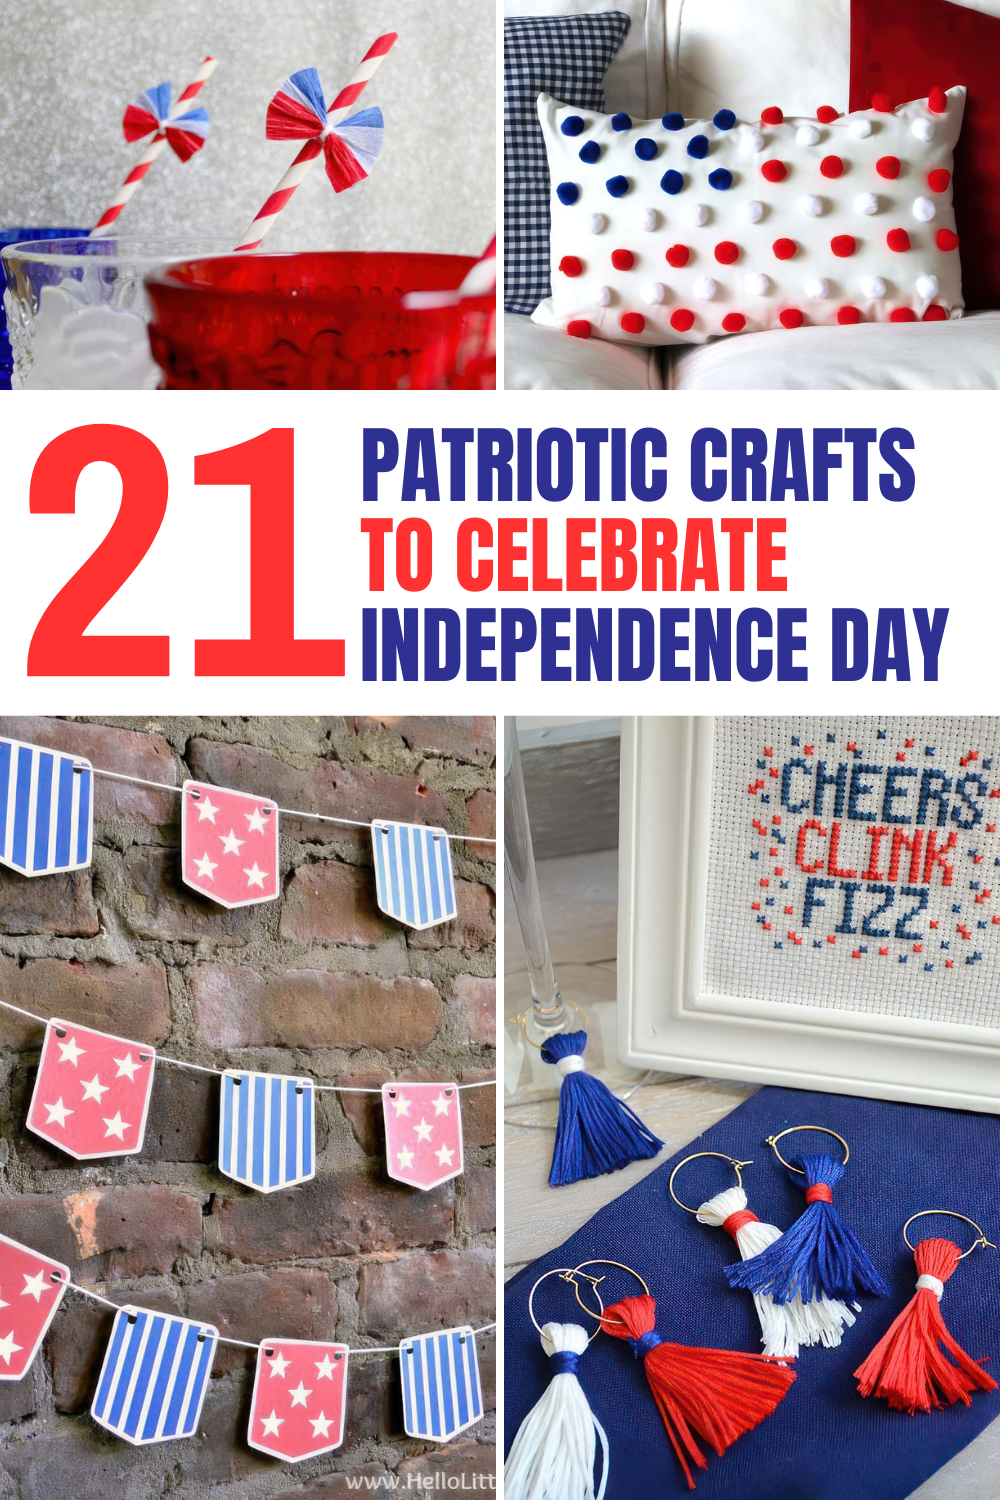 Celebrate the 4th of July with these stylish and easy crafts! Perfect for adults, these red, white, and blue projects will add a festive touch to your home and party decor. Click to check out all the creative ideas! 🎨🖌️

